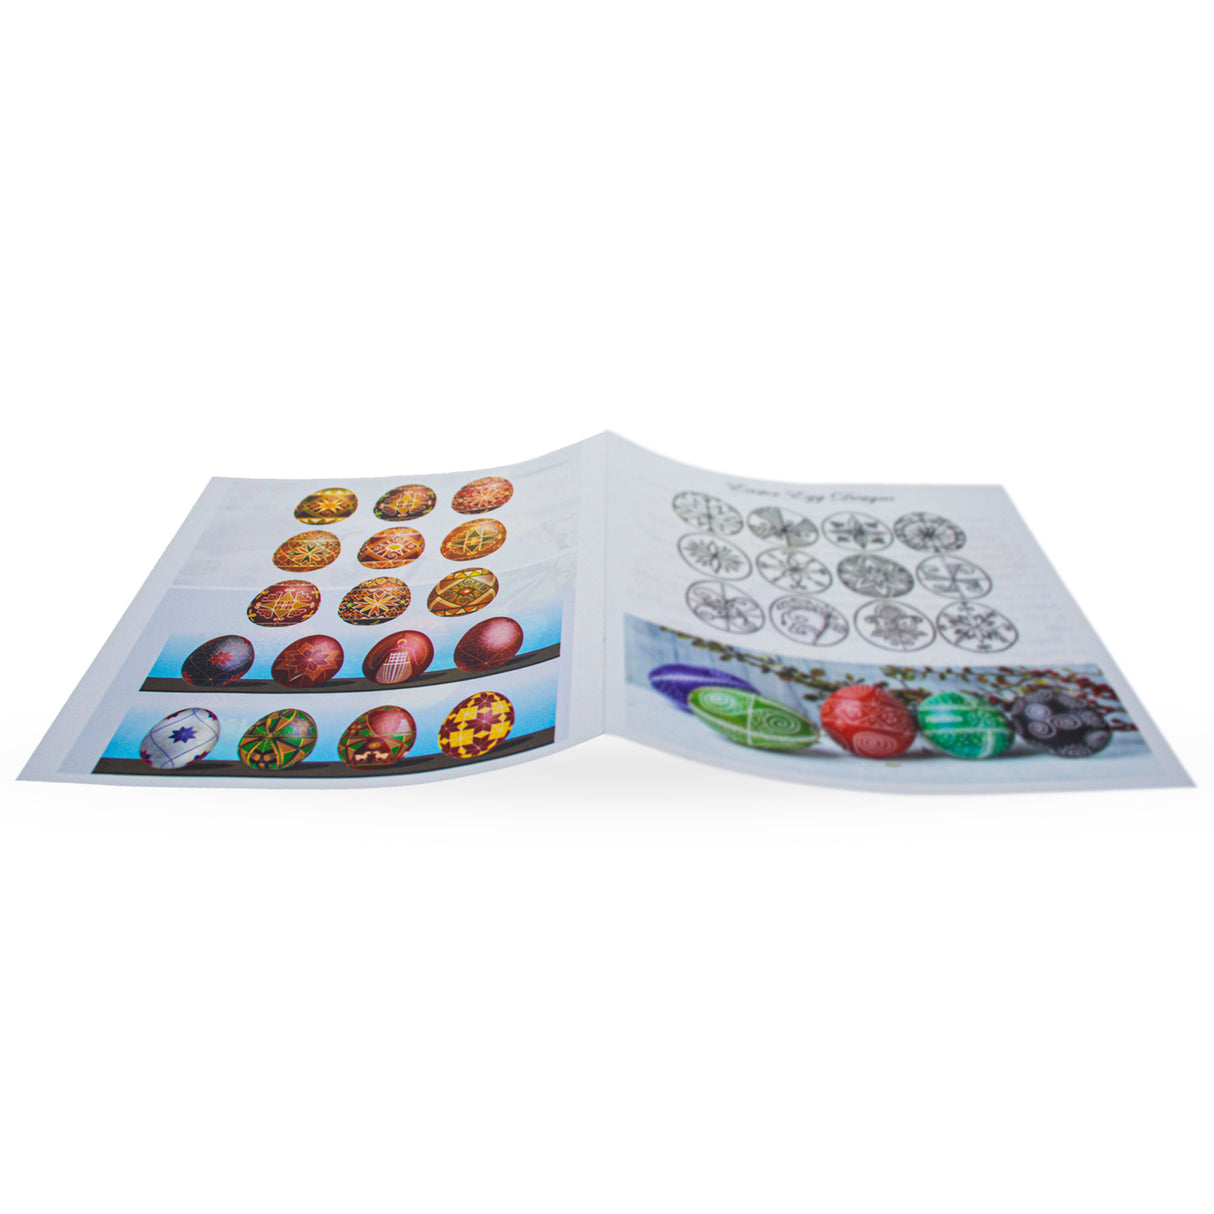 Egg Decorating Instruction and Template in Multi color, Rectangular shape